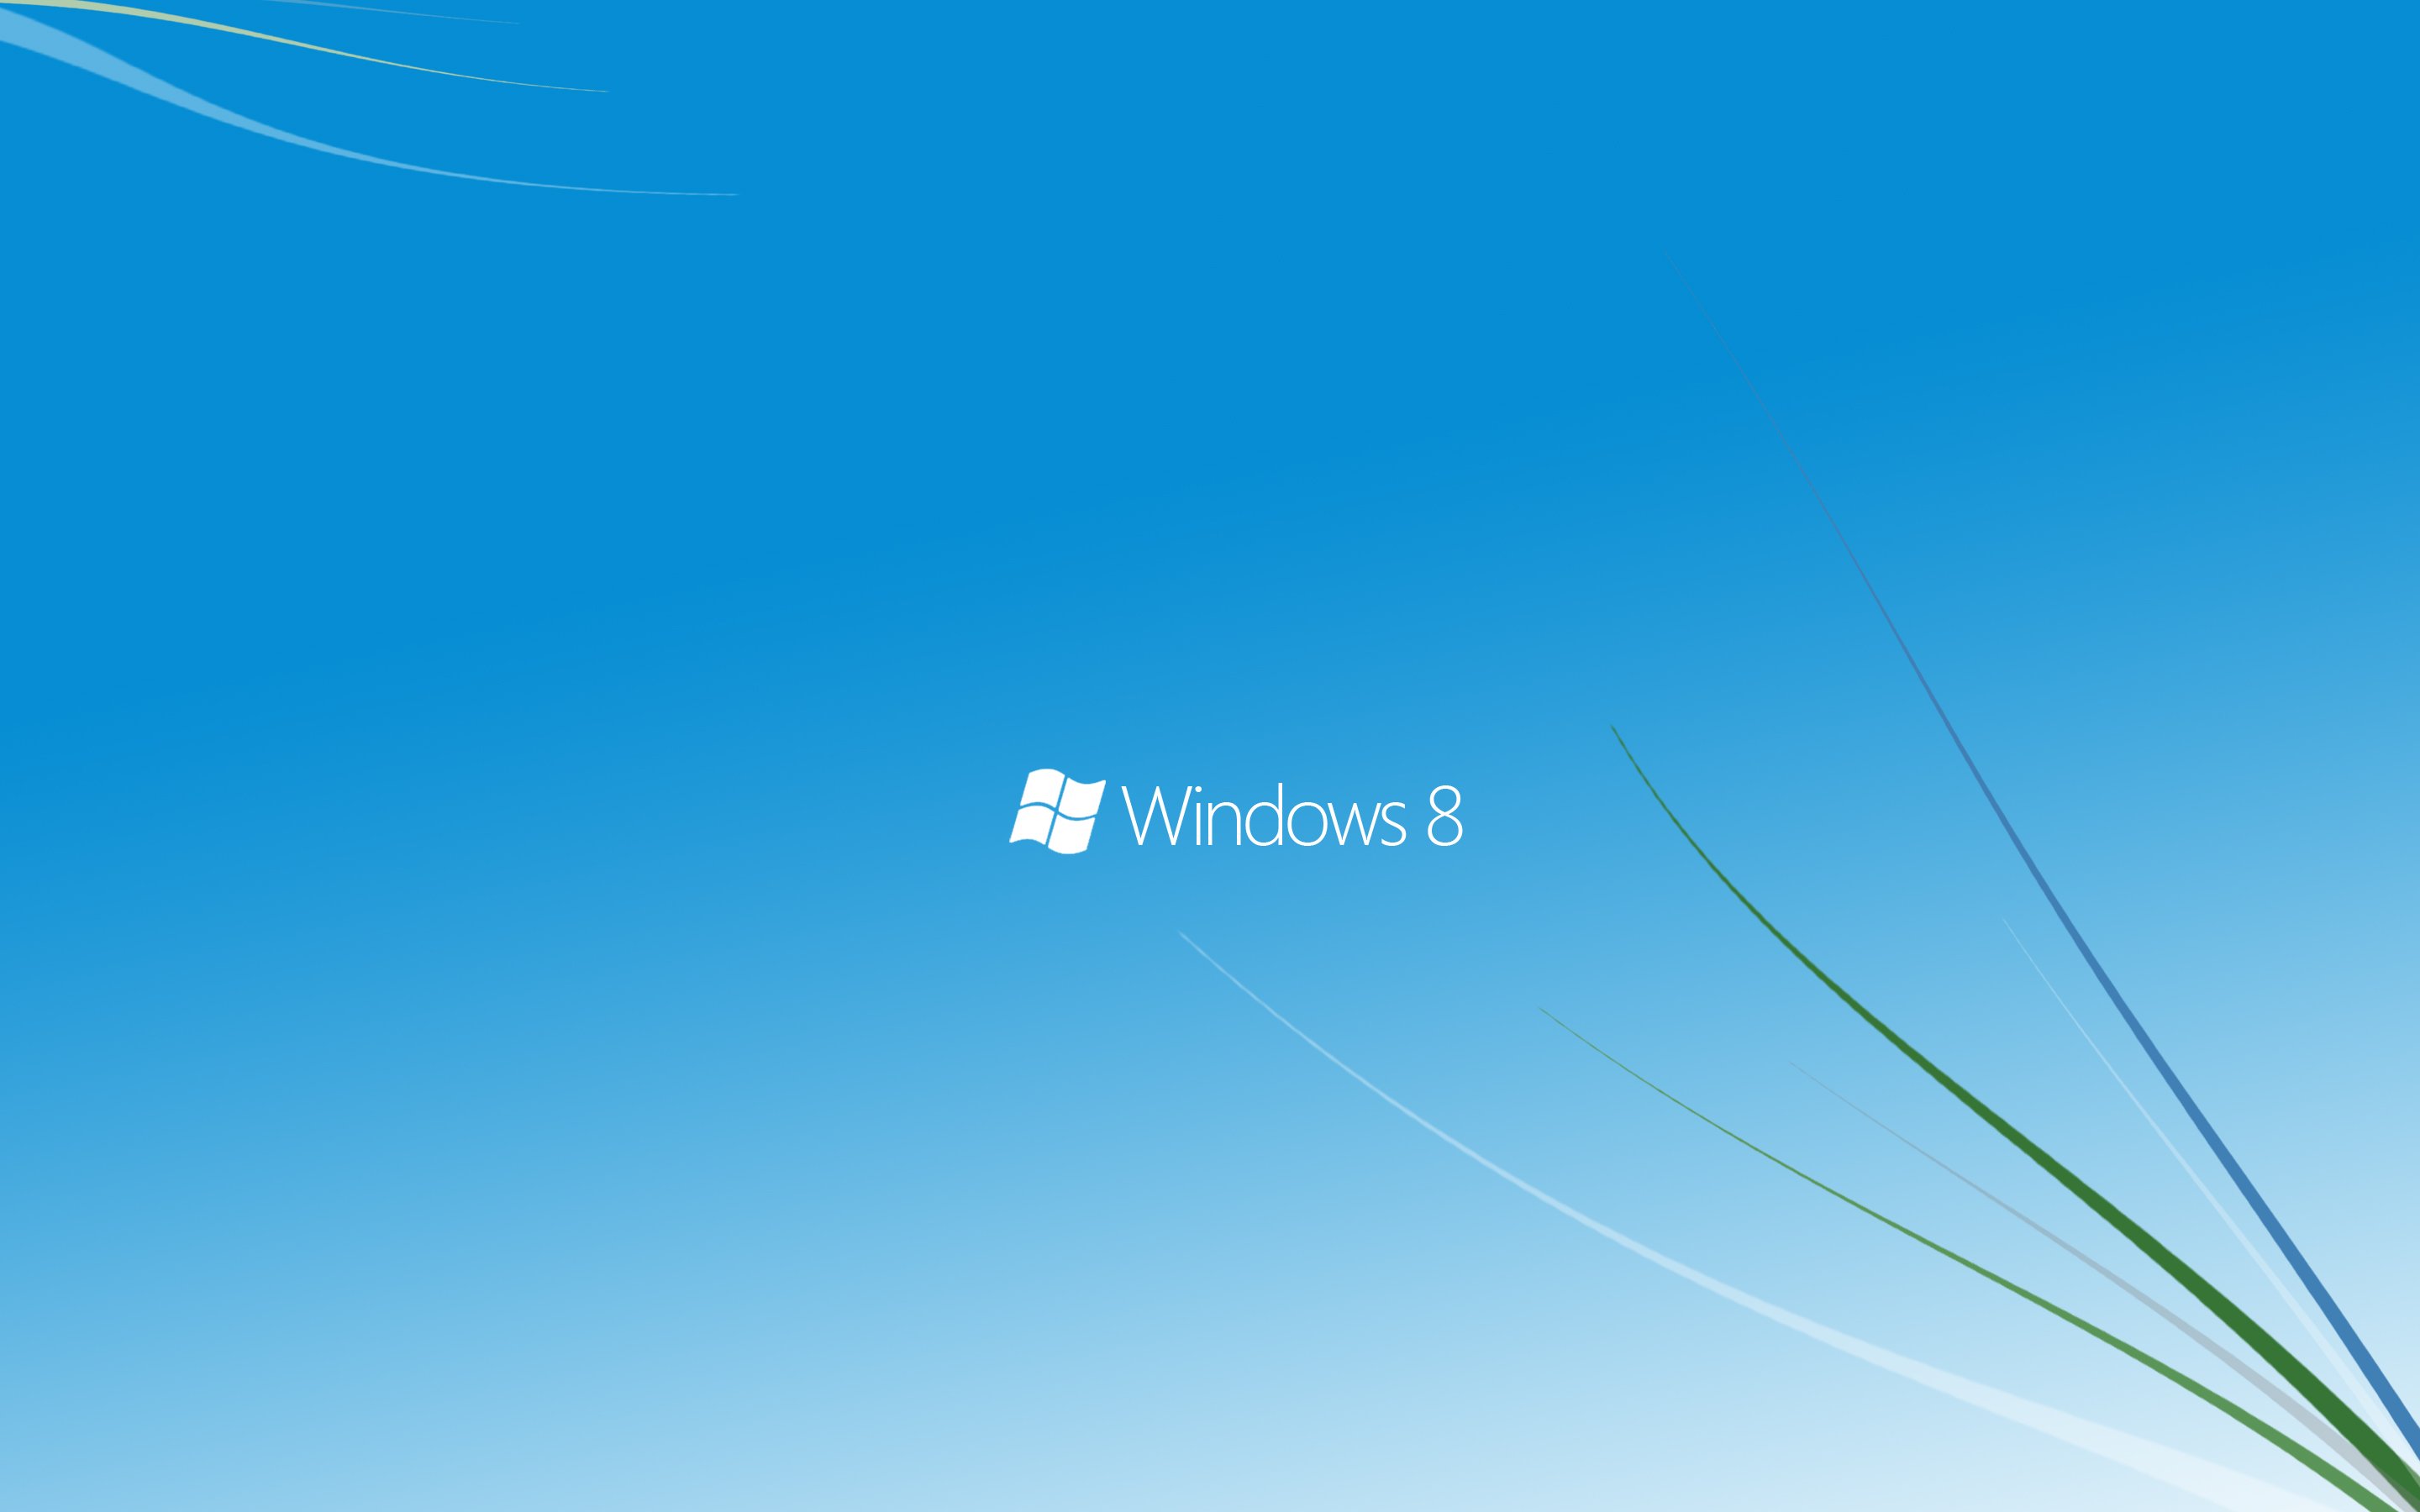 windows 8 full hd wallpapers wallpapers55com   Best Wallpapers for